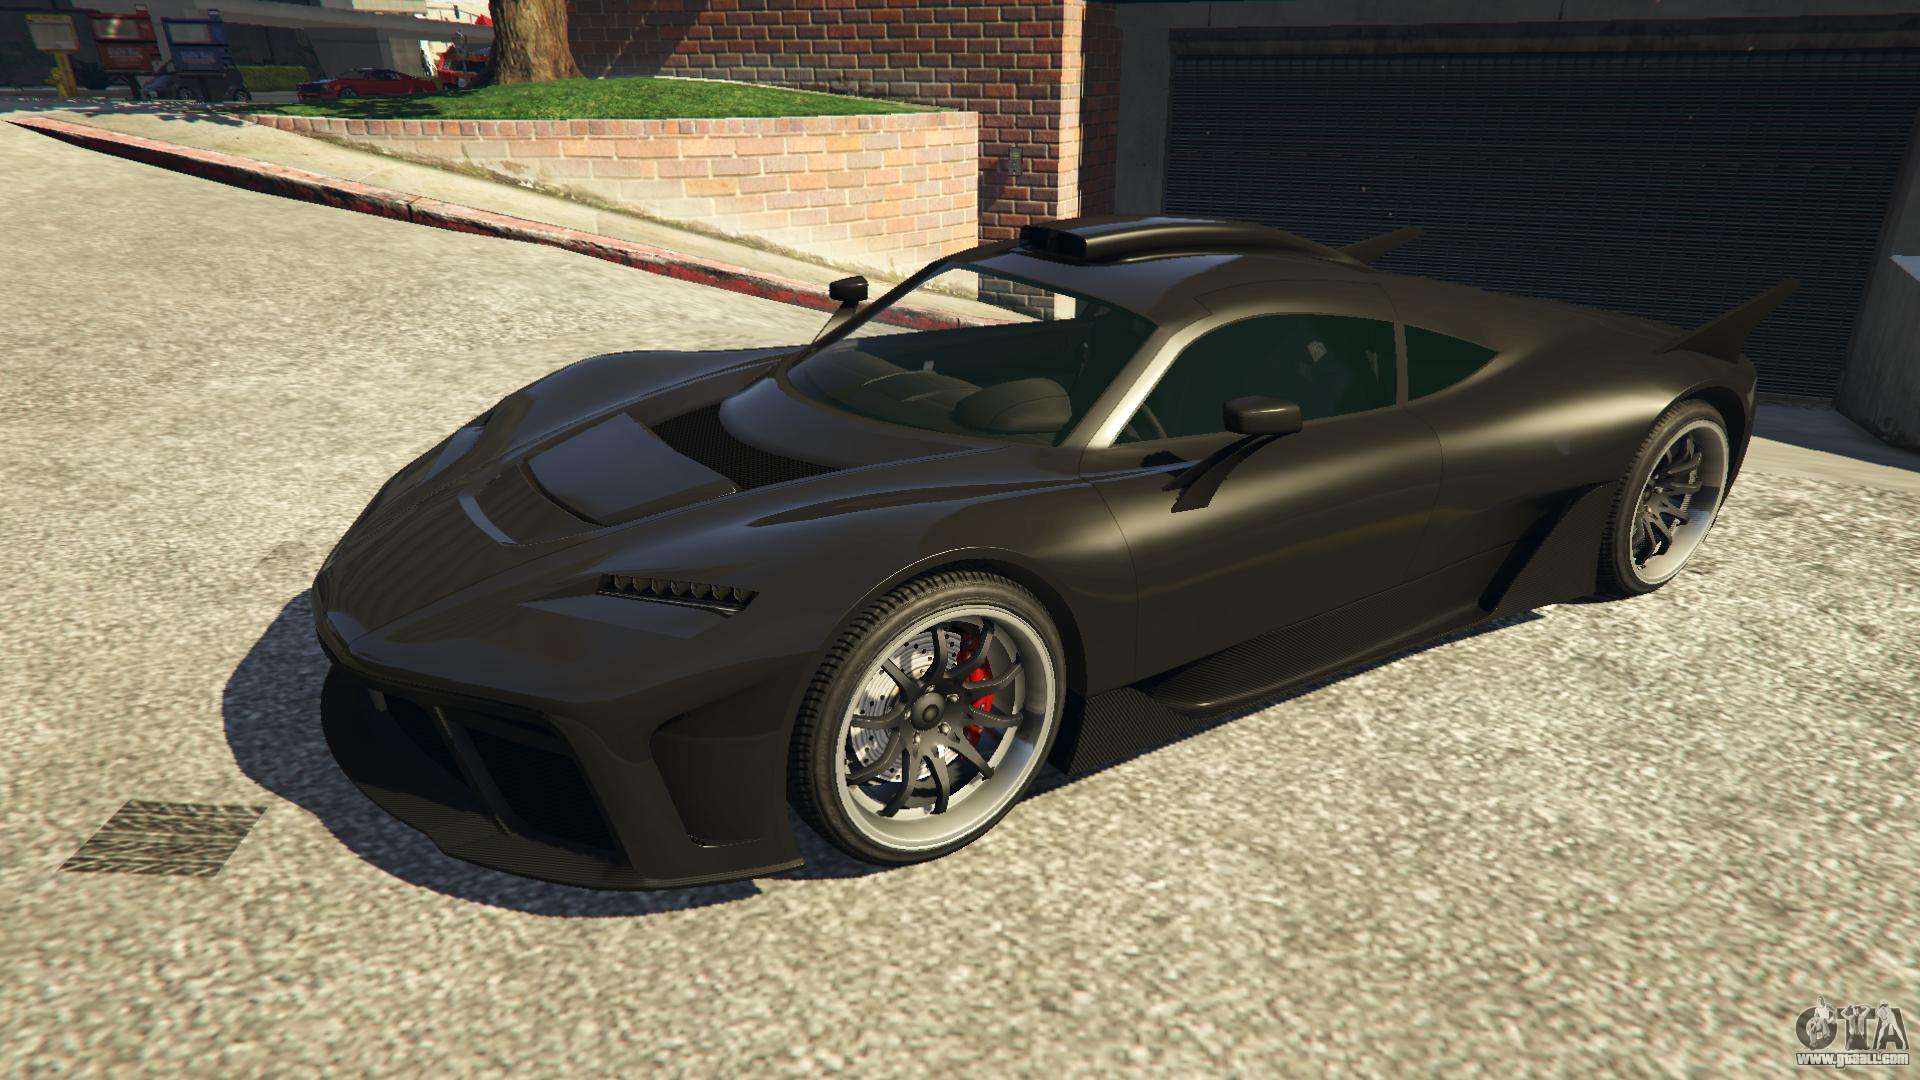 Benefactor Krieger In Gta 5 Online Where To Find And To Buy And Sell In